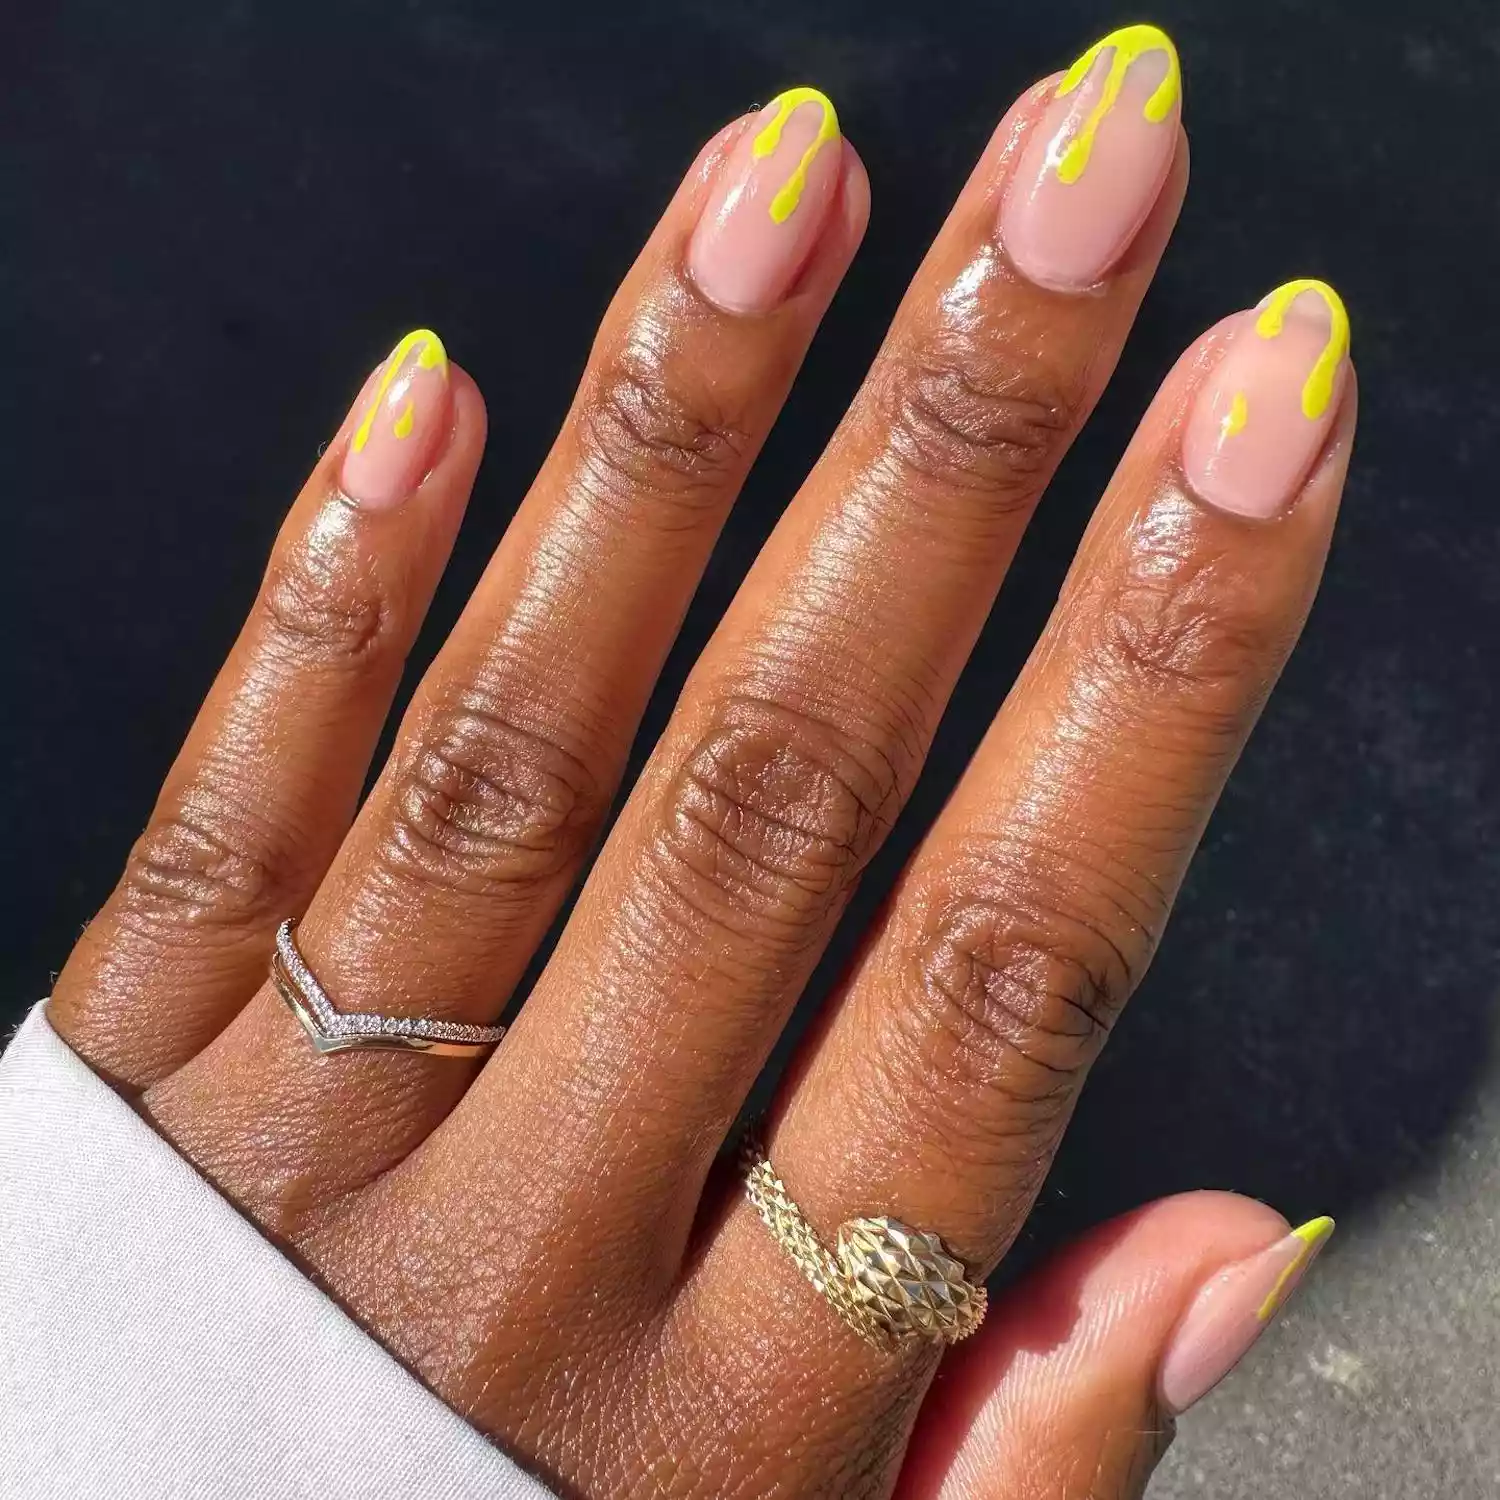 Manicure with pale pink base and yellow-green slime detail